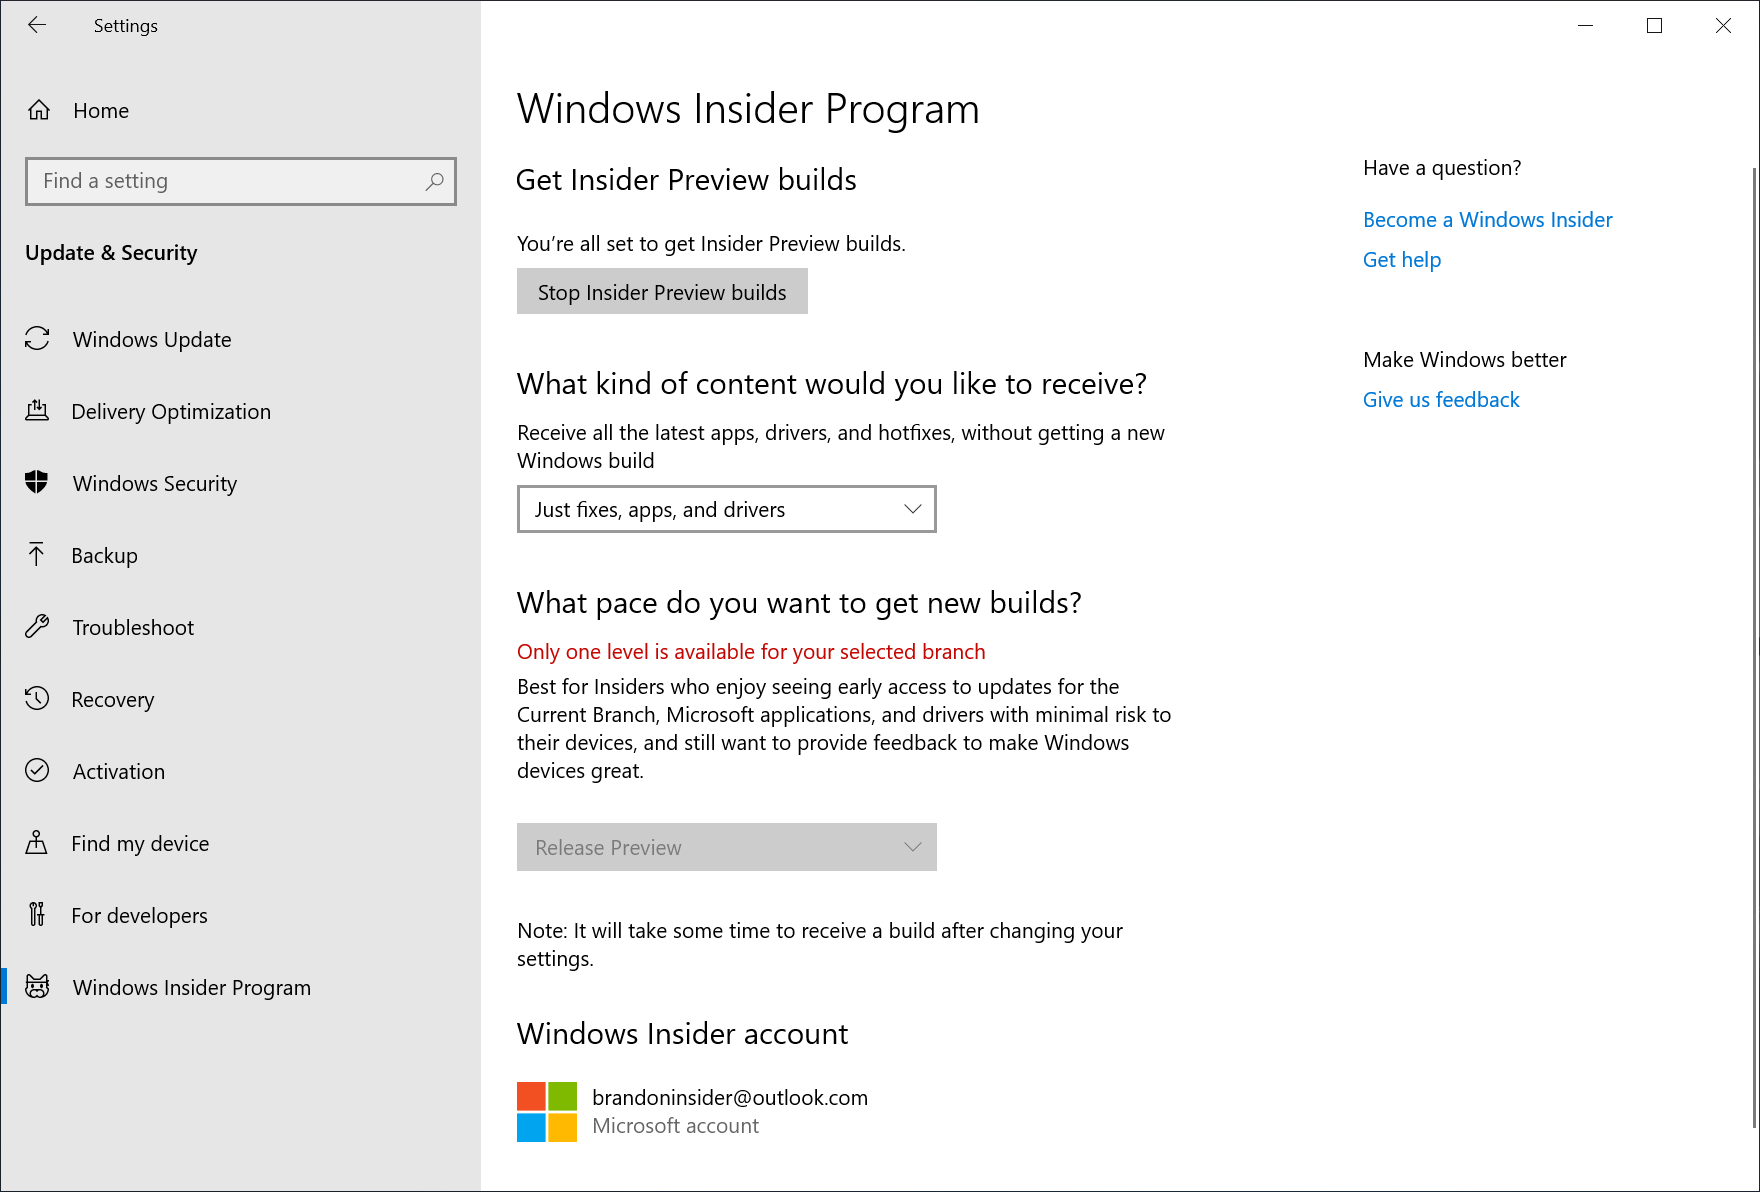 Step 6: After rebooting your PC, double-check your Windows Insider Program settings via Settings > Update & Security > Windows Insider Program and make sure it shows “Release Preview” under “What pace do you want to get new builds?”.